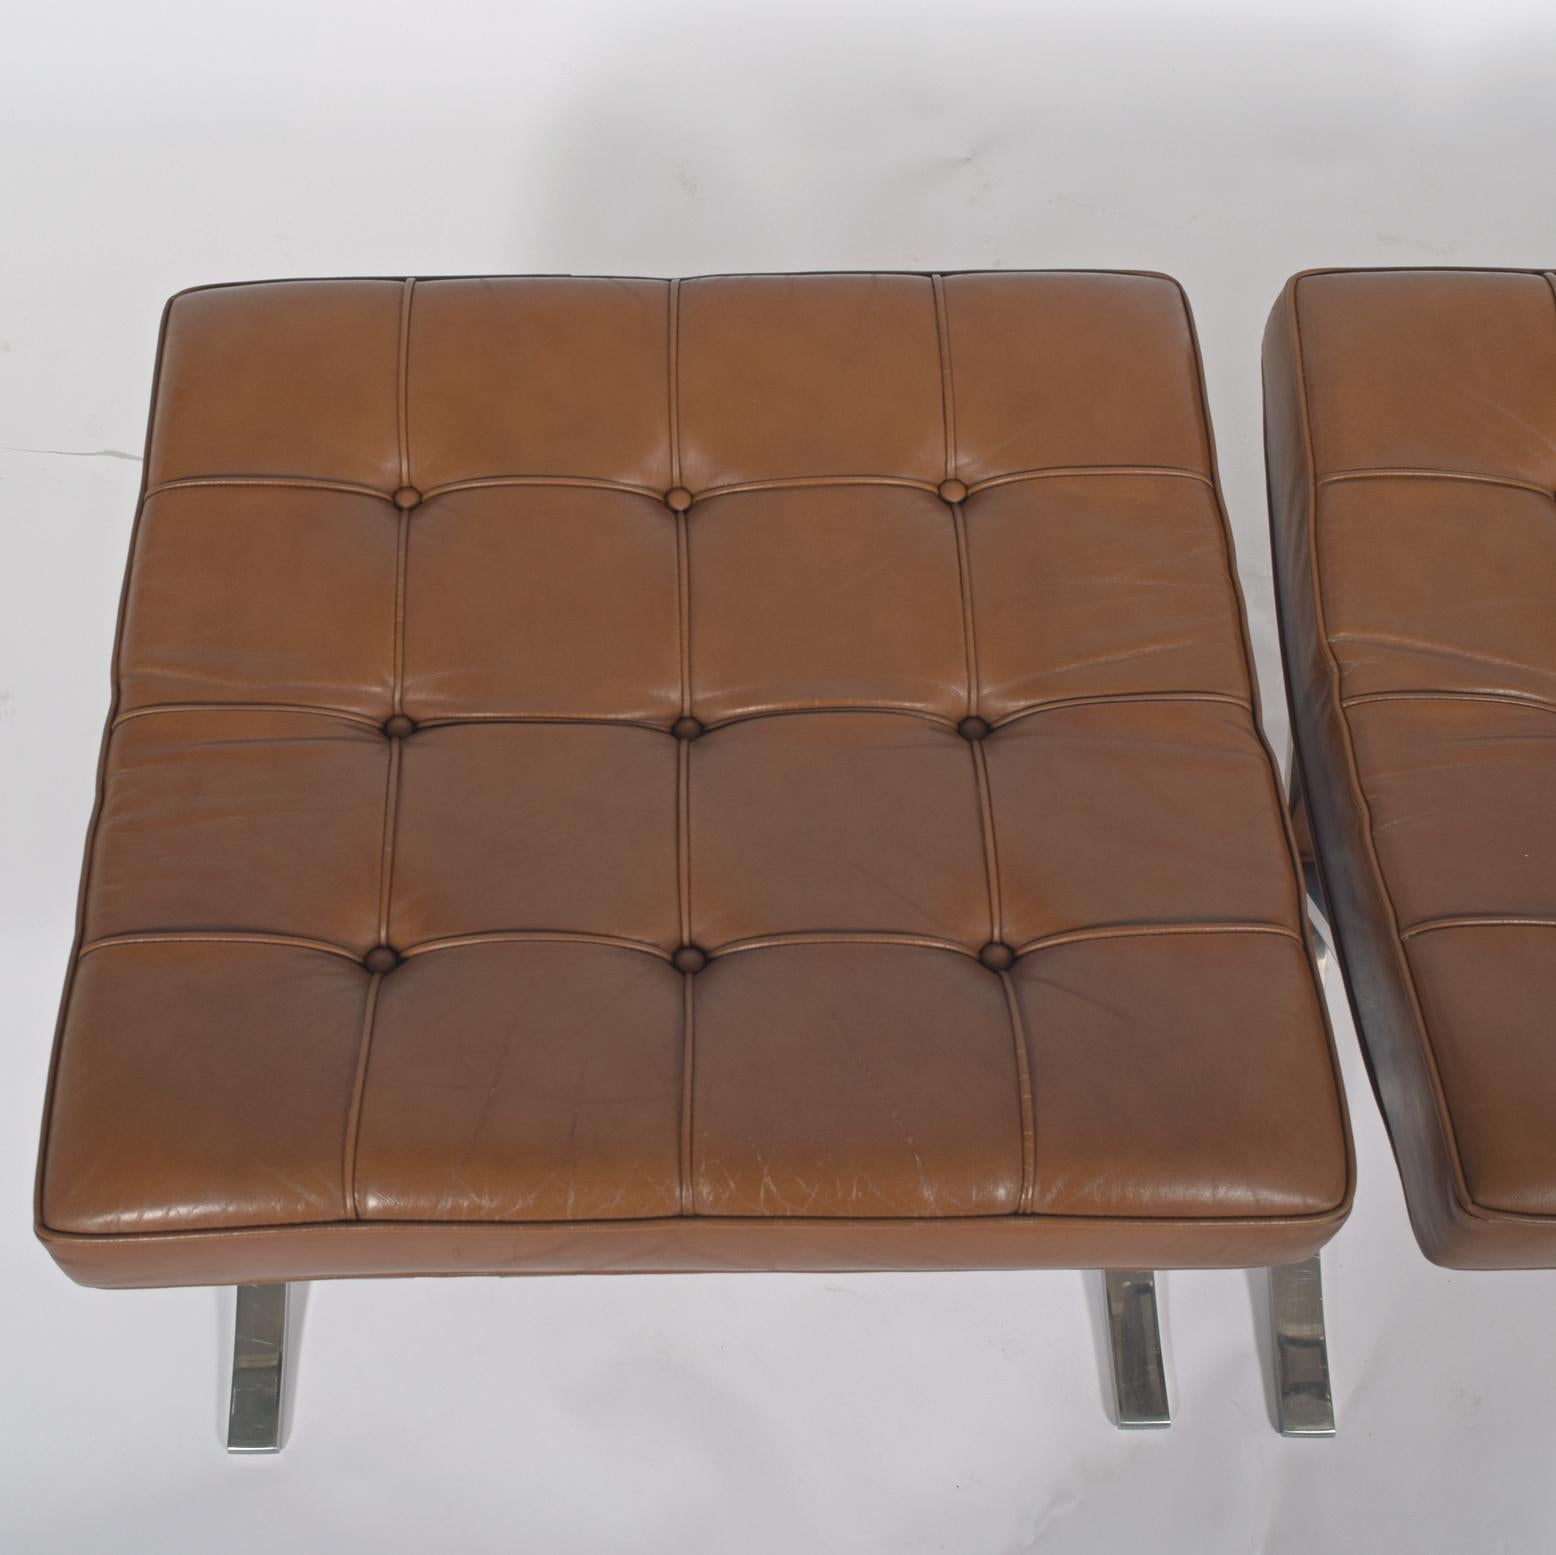 Stainless Steel Mies van Der Rohe Pair of Barcelona Stools Knoll Int., 1970s